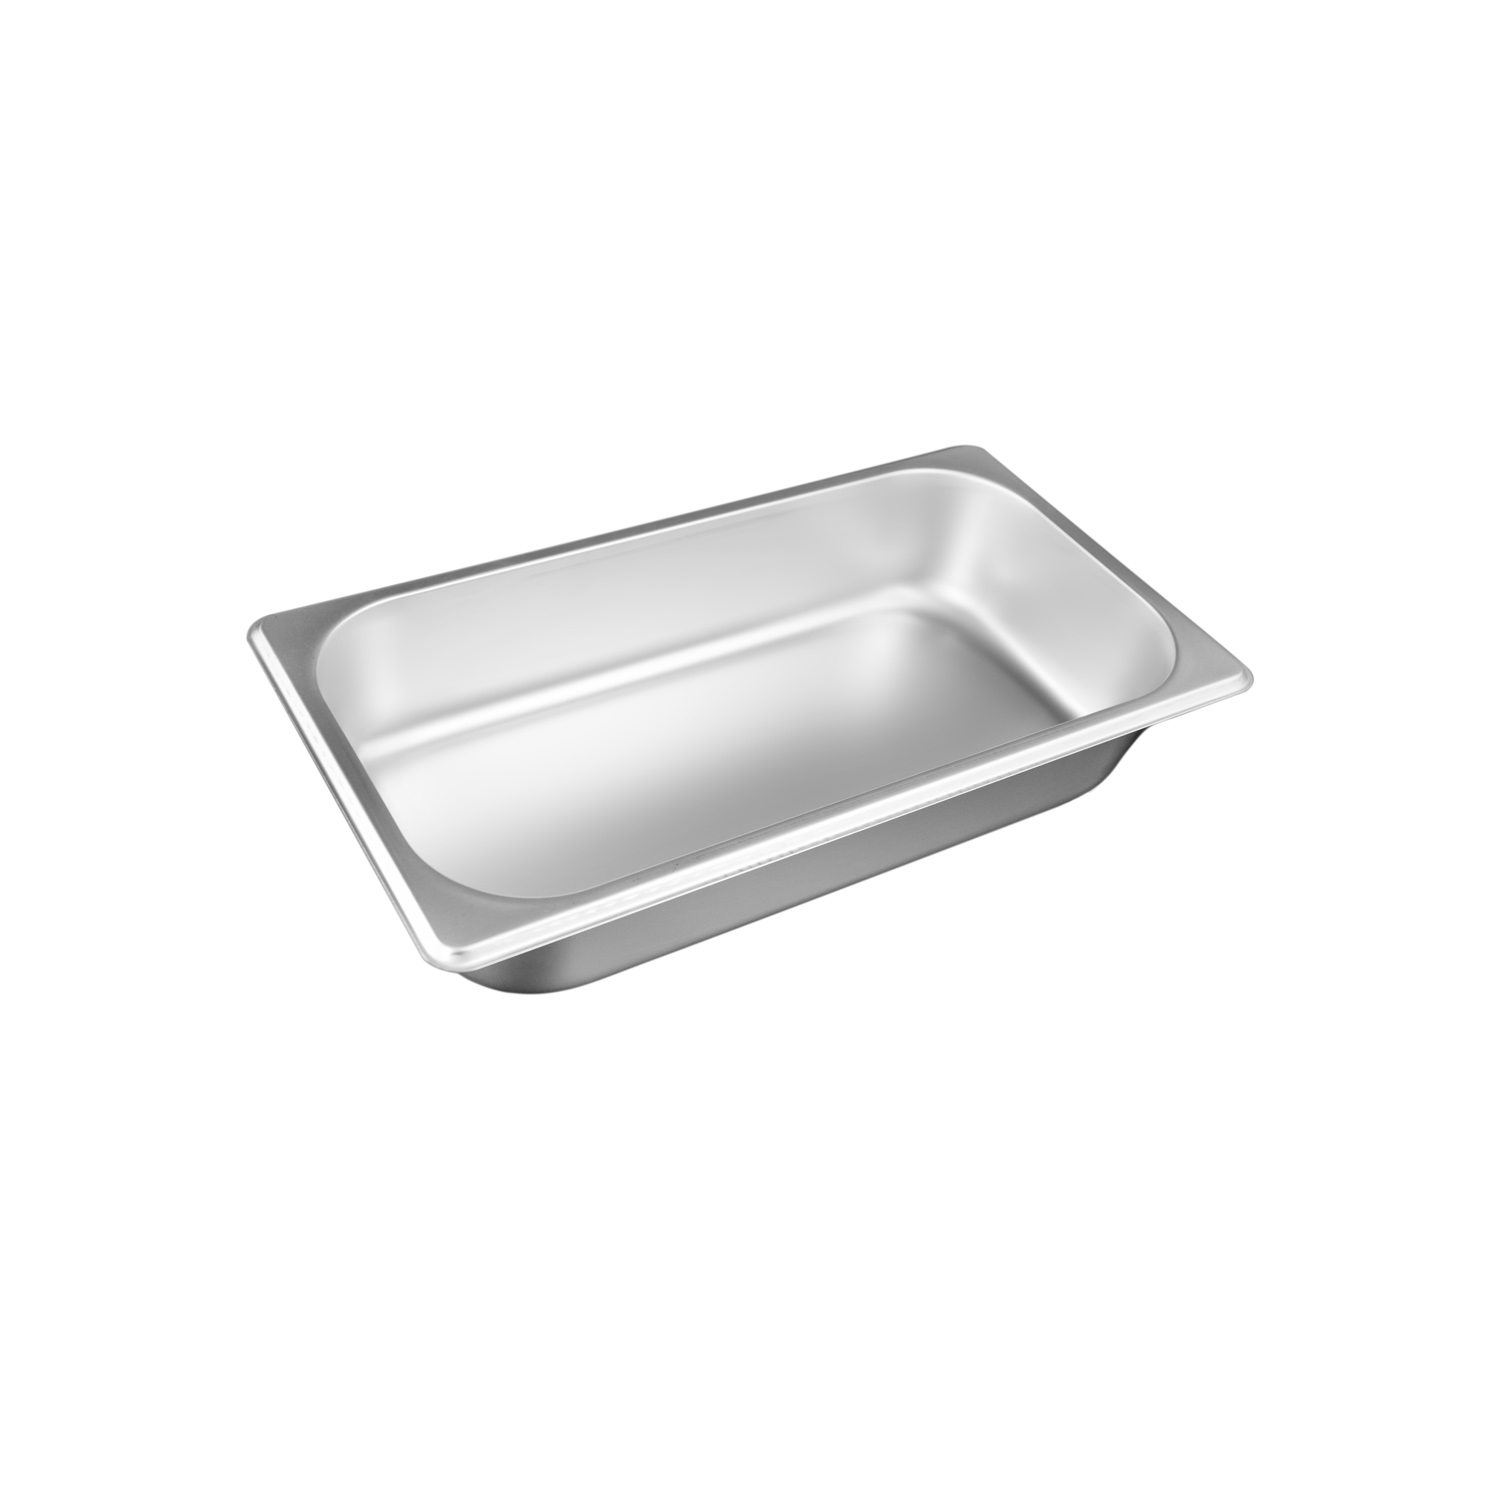 CAC China STPT-S25-2 1/3 Size 25-Gauge Stainless Steel Steam Pan, 2-1/2" Deep